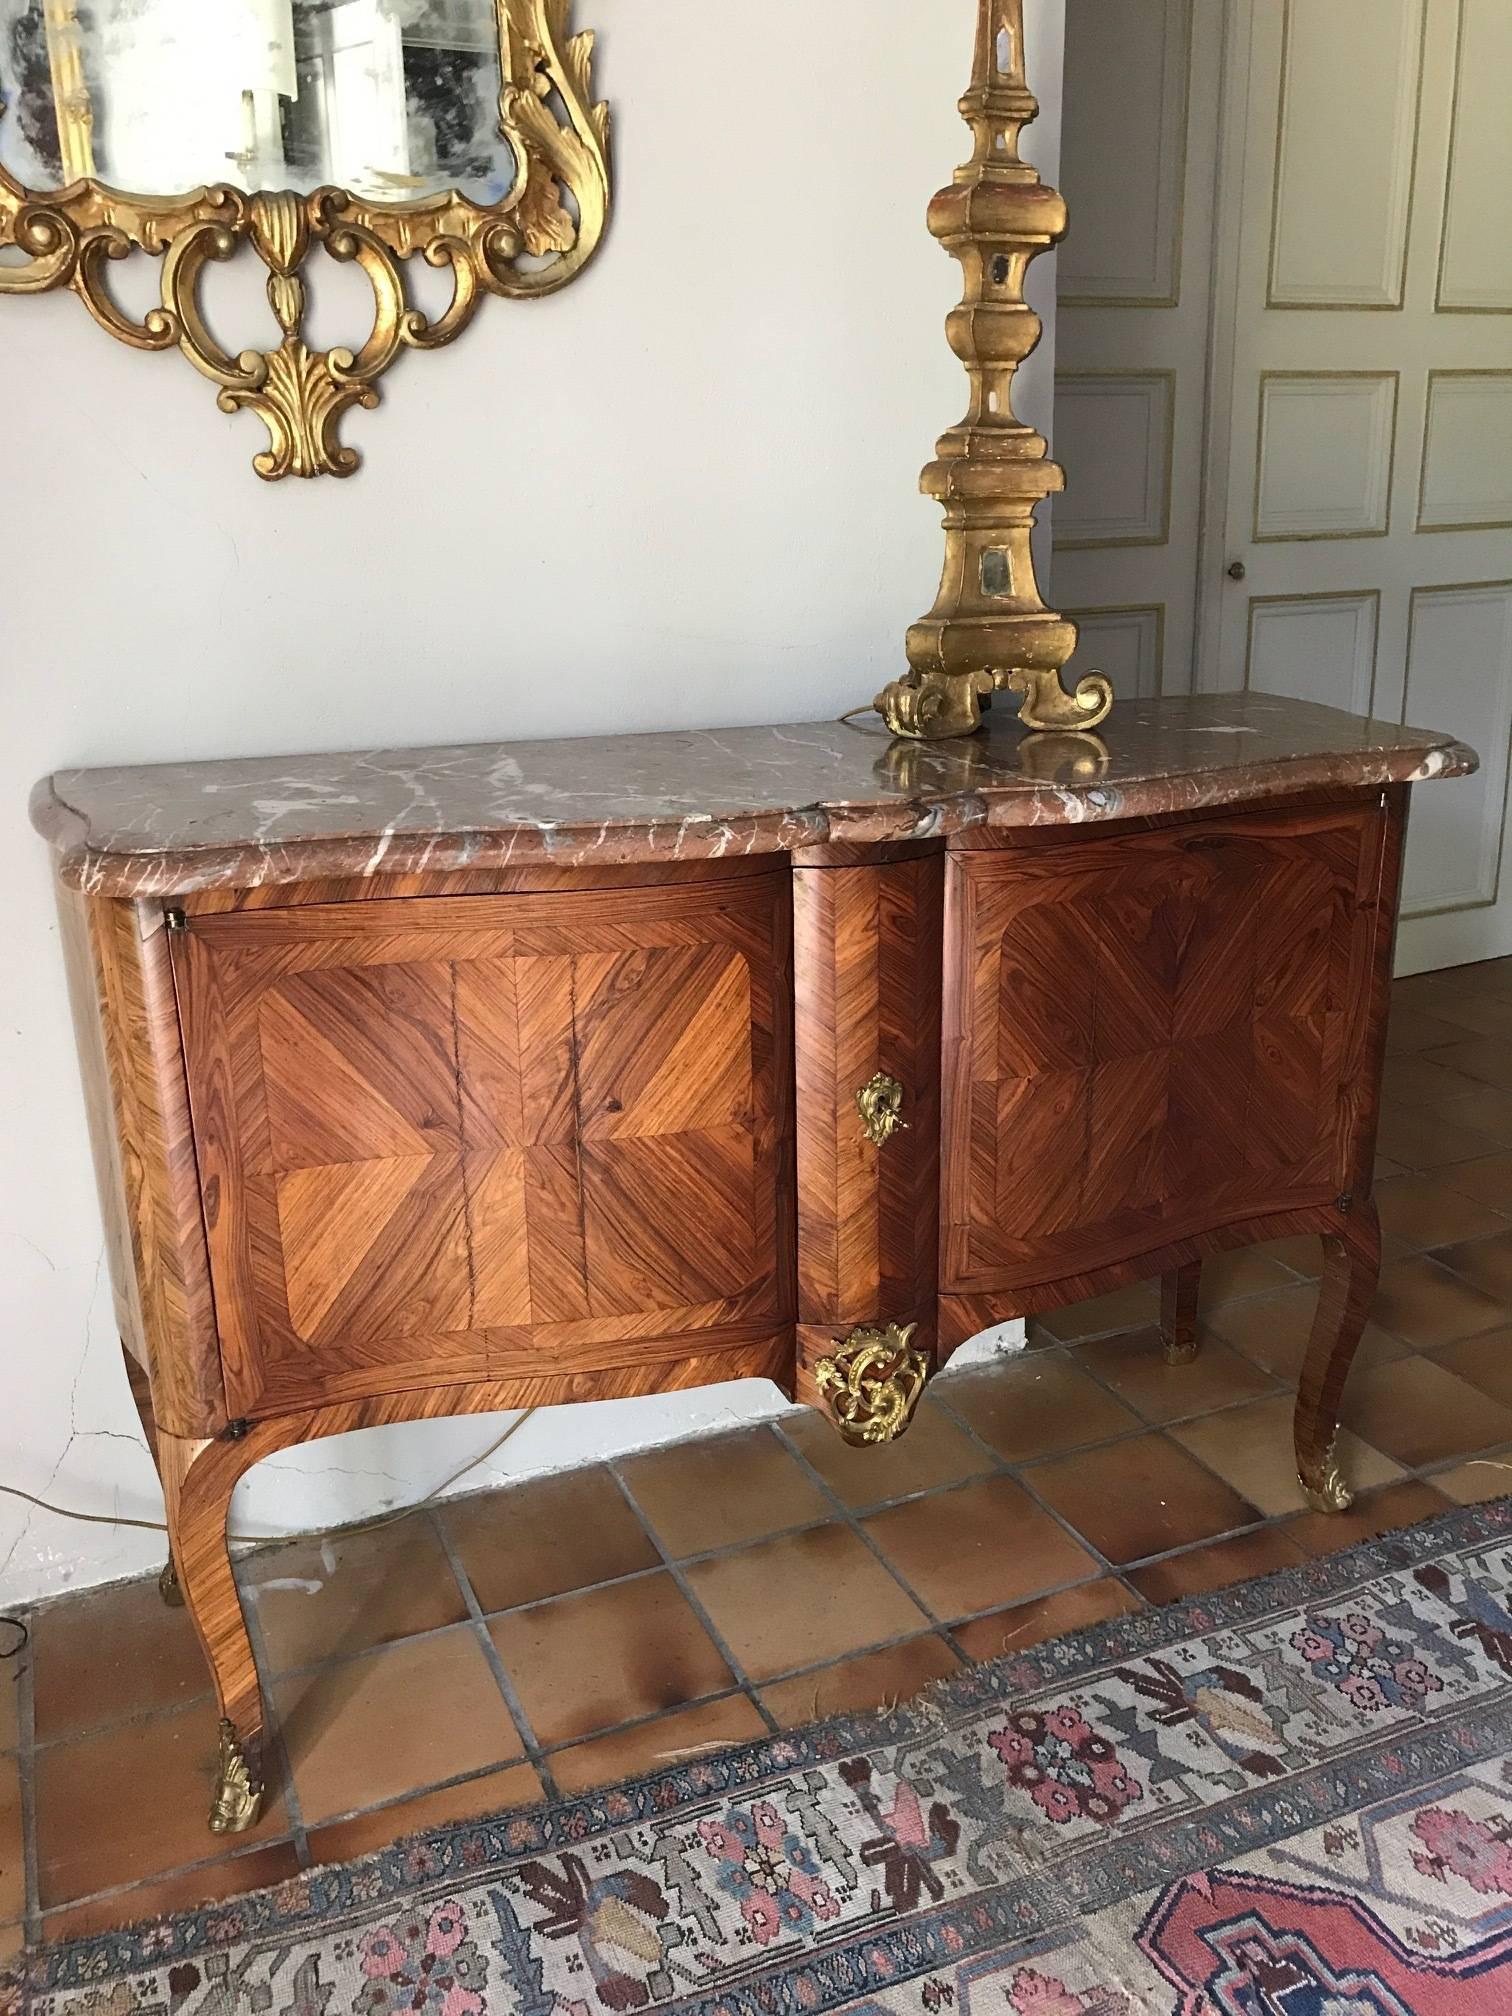 French Louis XV Style Enfilade Buffet Credenza with Marquetry Early 19th Century (Louis XV.)